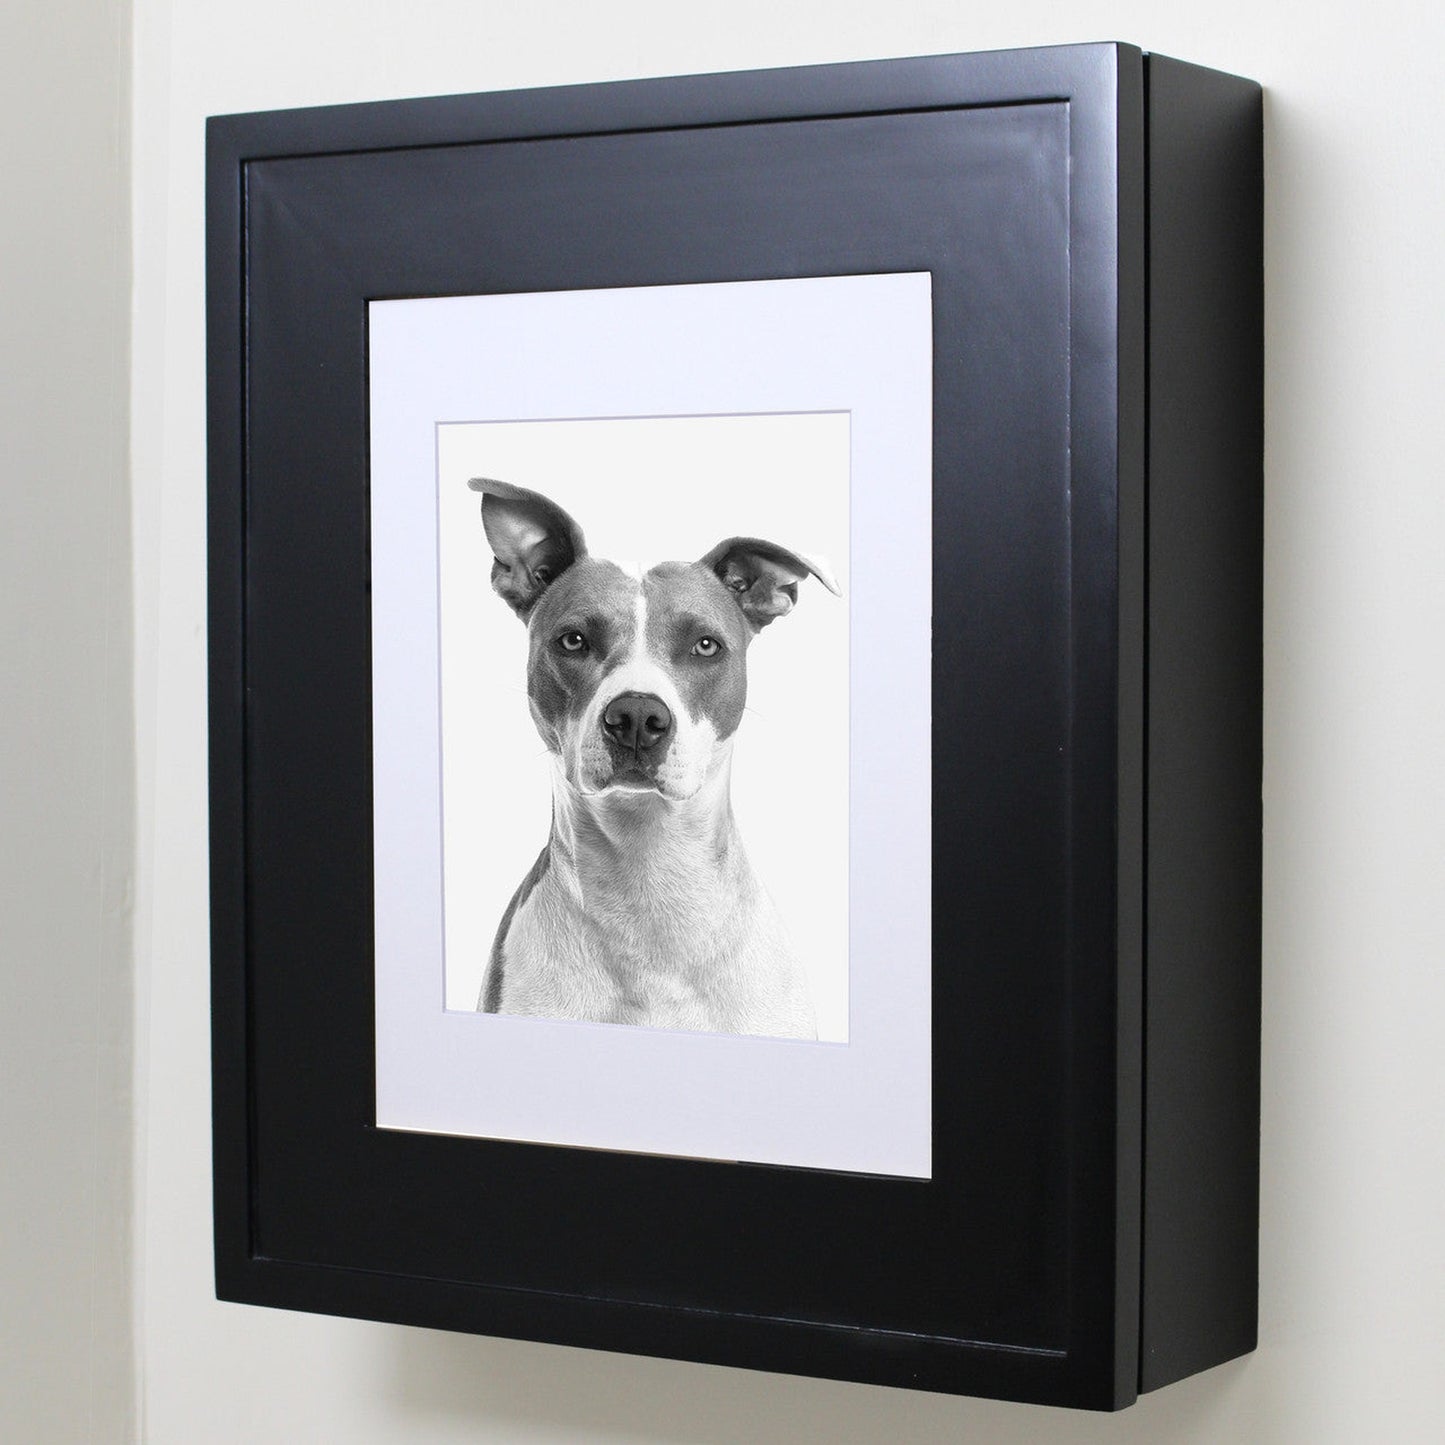 Fox Hollow Furnishings 20" x 17" Black Wall Mount Picture Frame Medicine Cabinet With Mirror and White 8" x 10" Matting